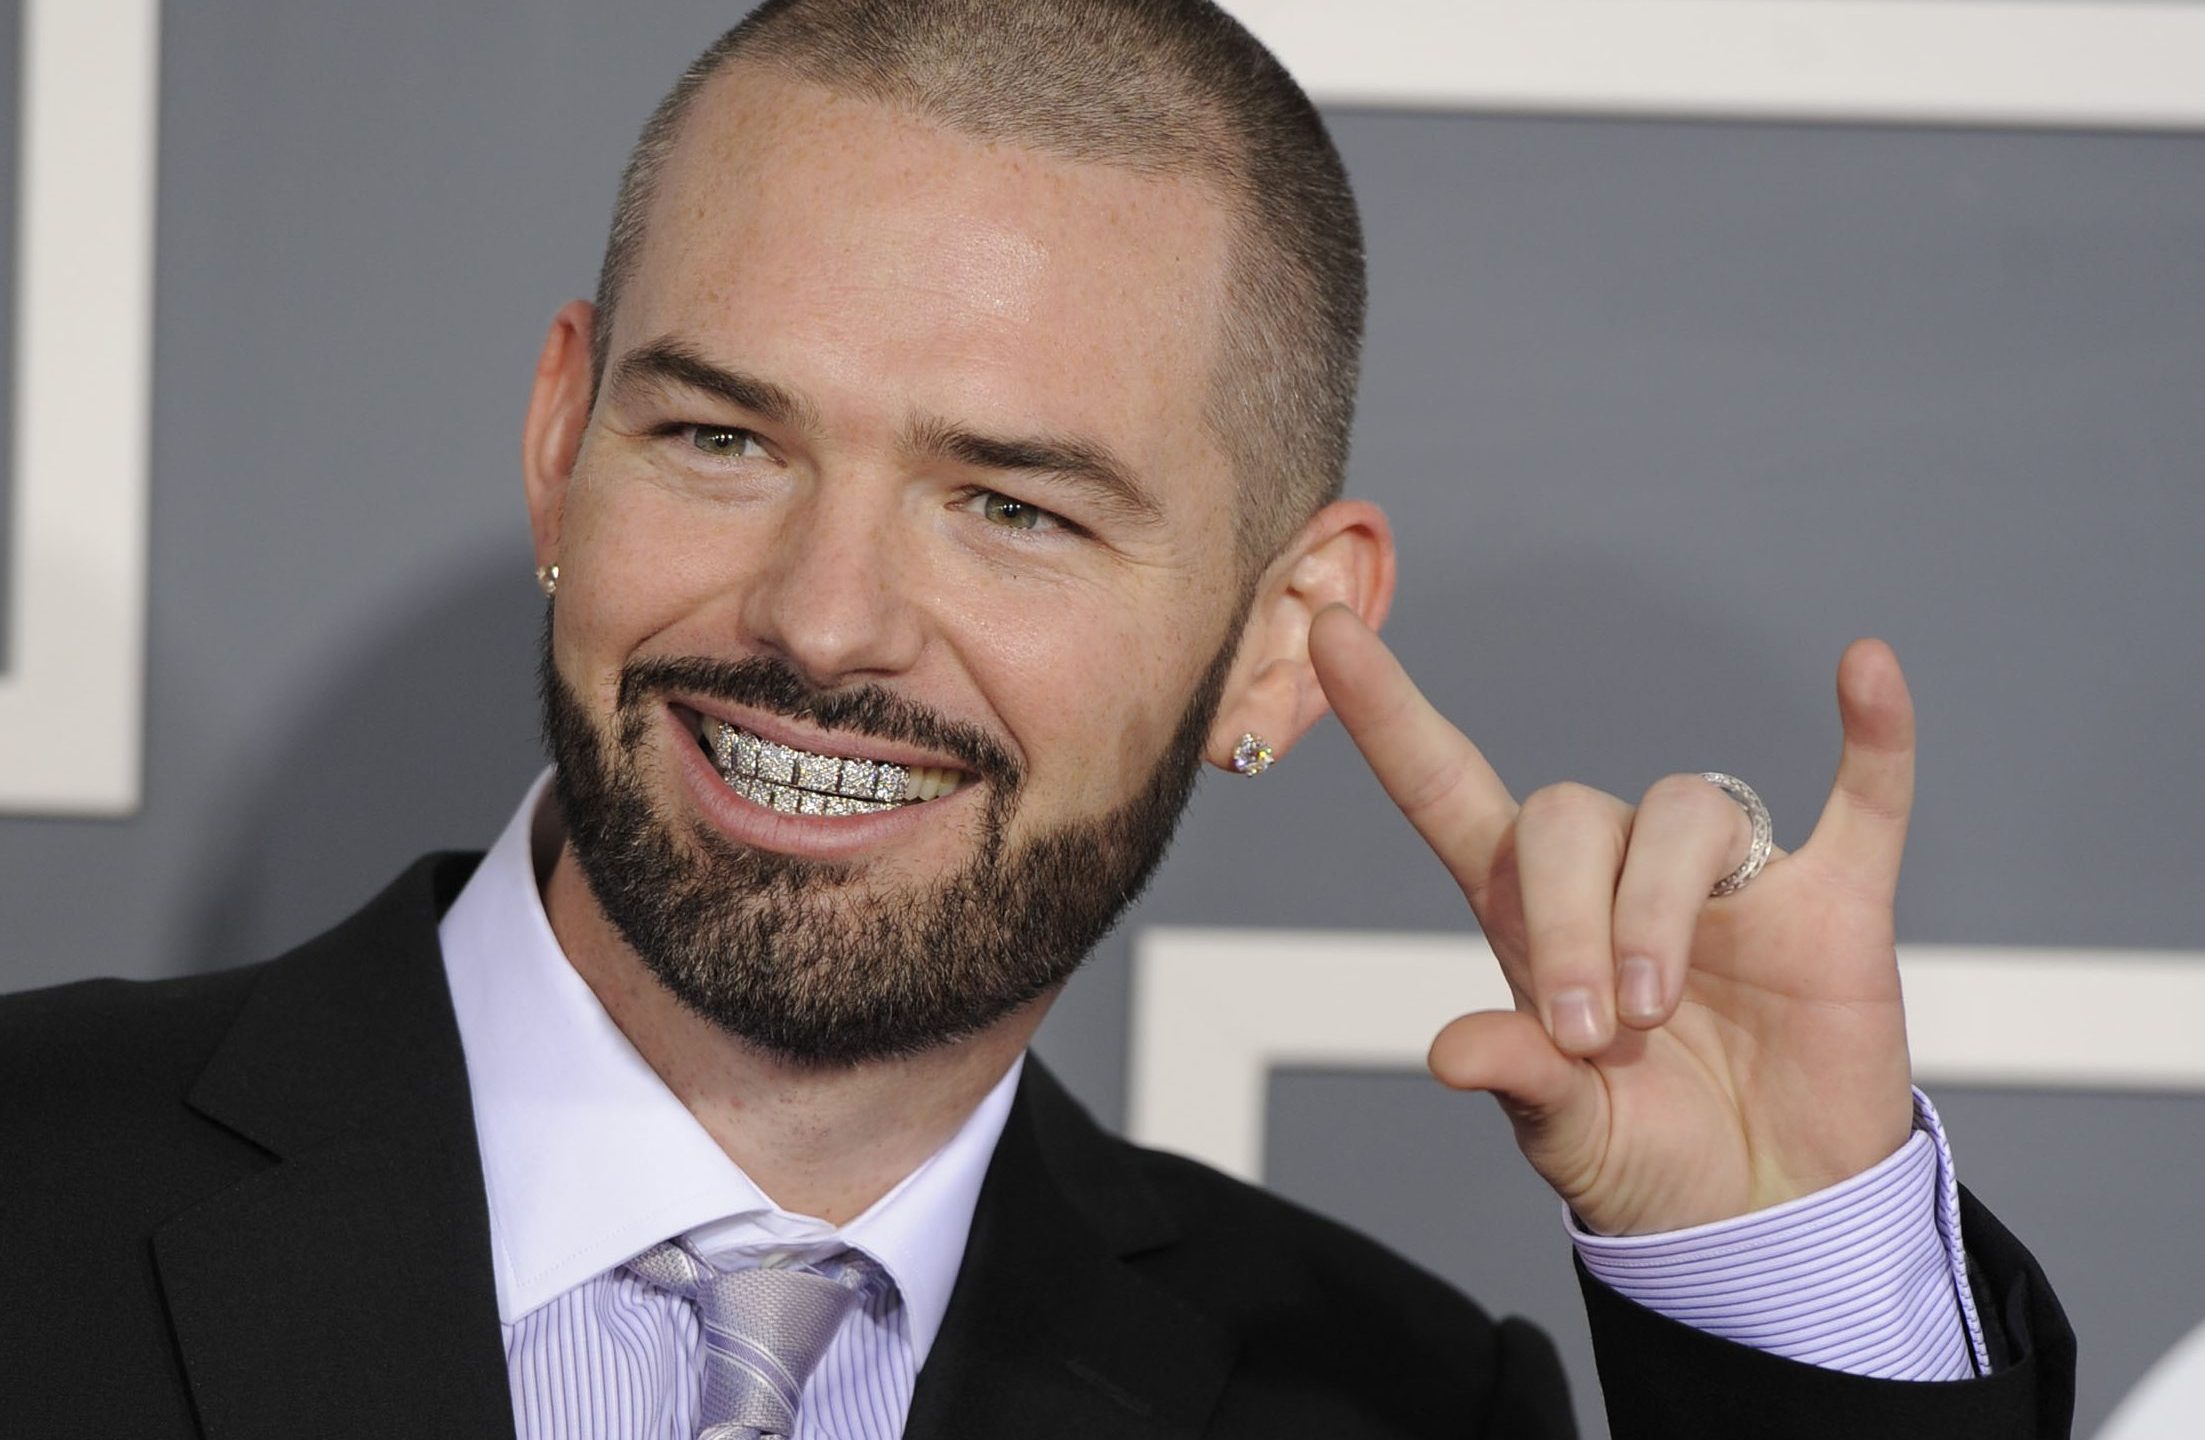 Paul Wall claims his father was a serial rapist